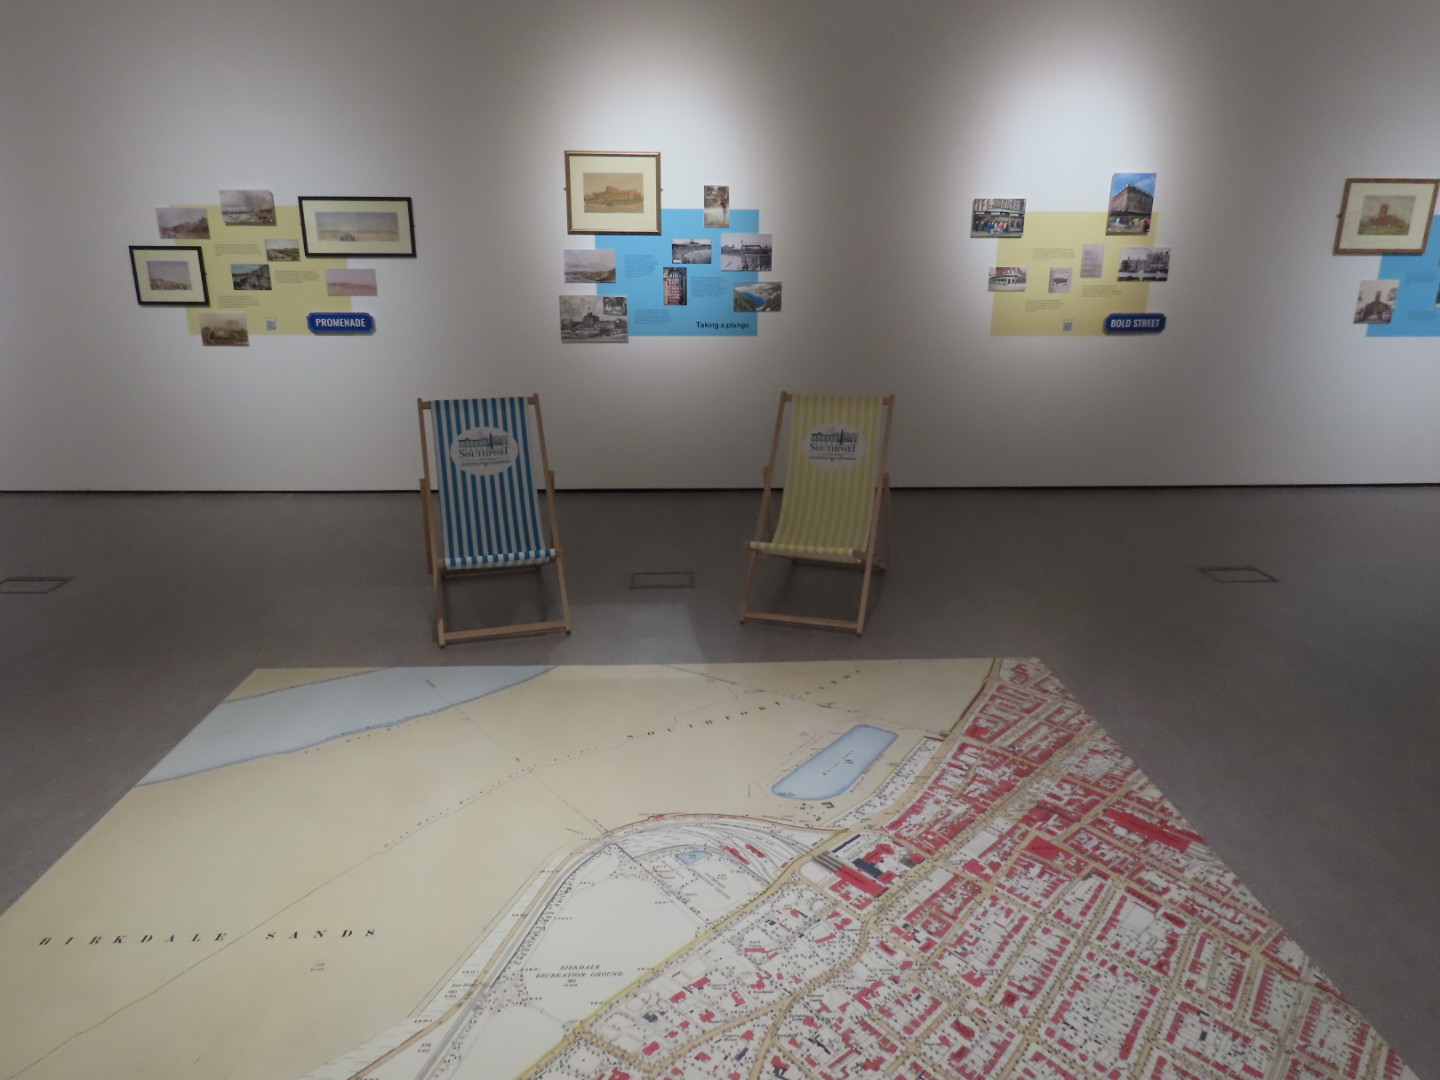 The exhibition Built on Sand 200 years of Southport's changing street scene is at The Atkinson on Lord Street in Southport from Saturday, June 18th 2022 to September 2022